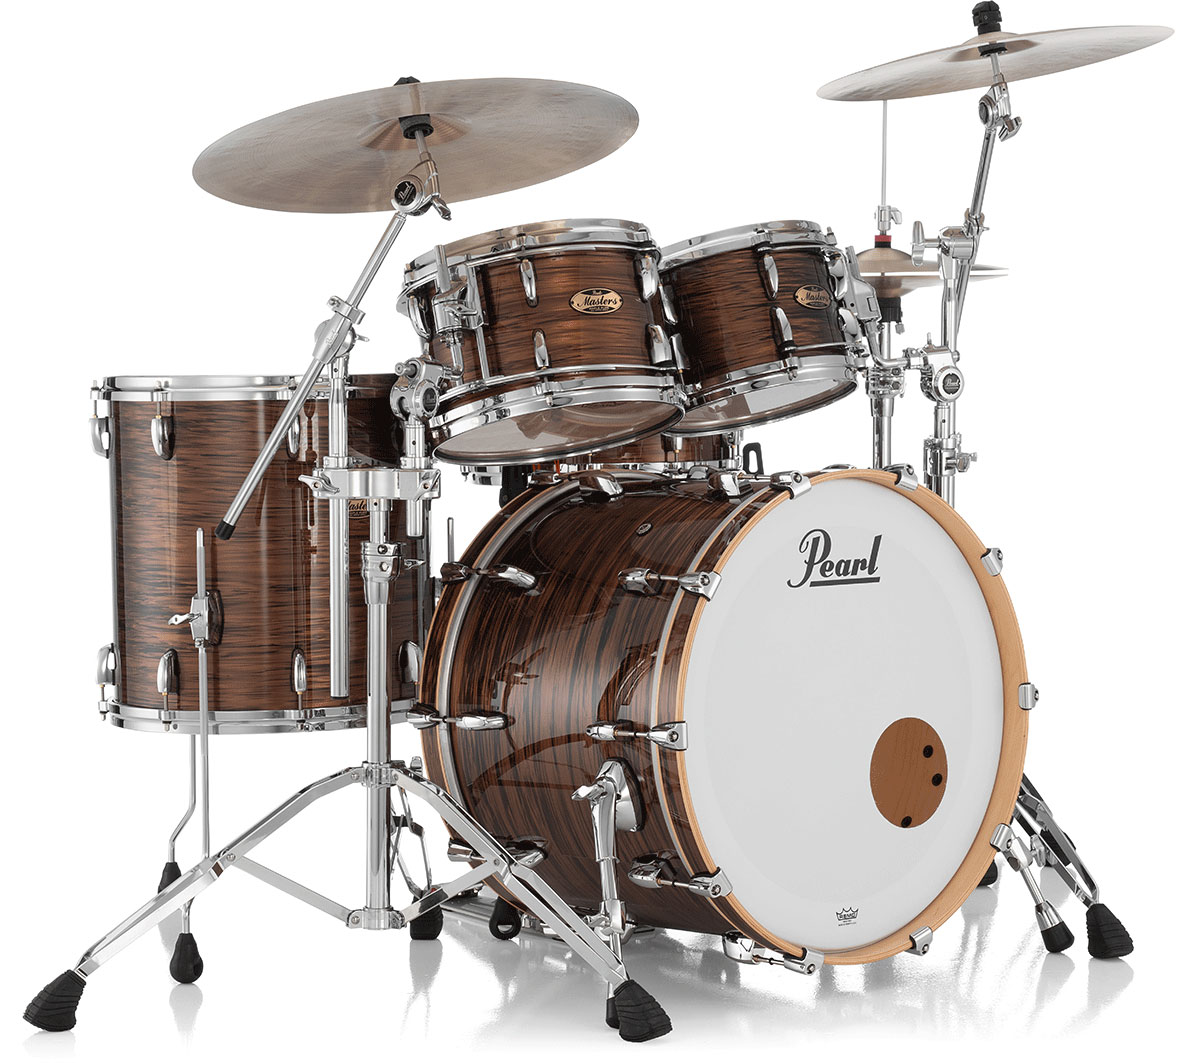 PEARL DRUMS MASTERS MAPLE PURE STAGE 22 GYROLOCK-L BRONZE OYSTER